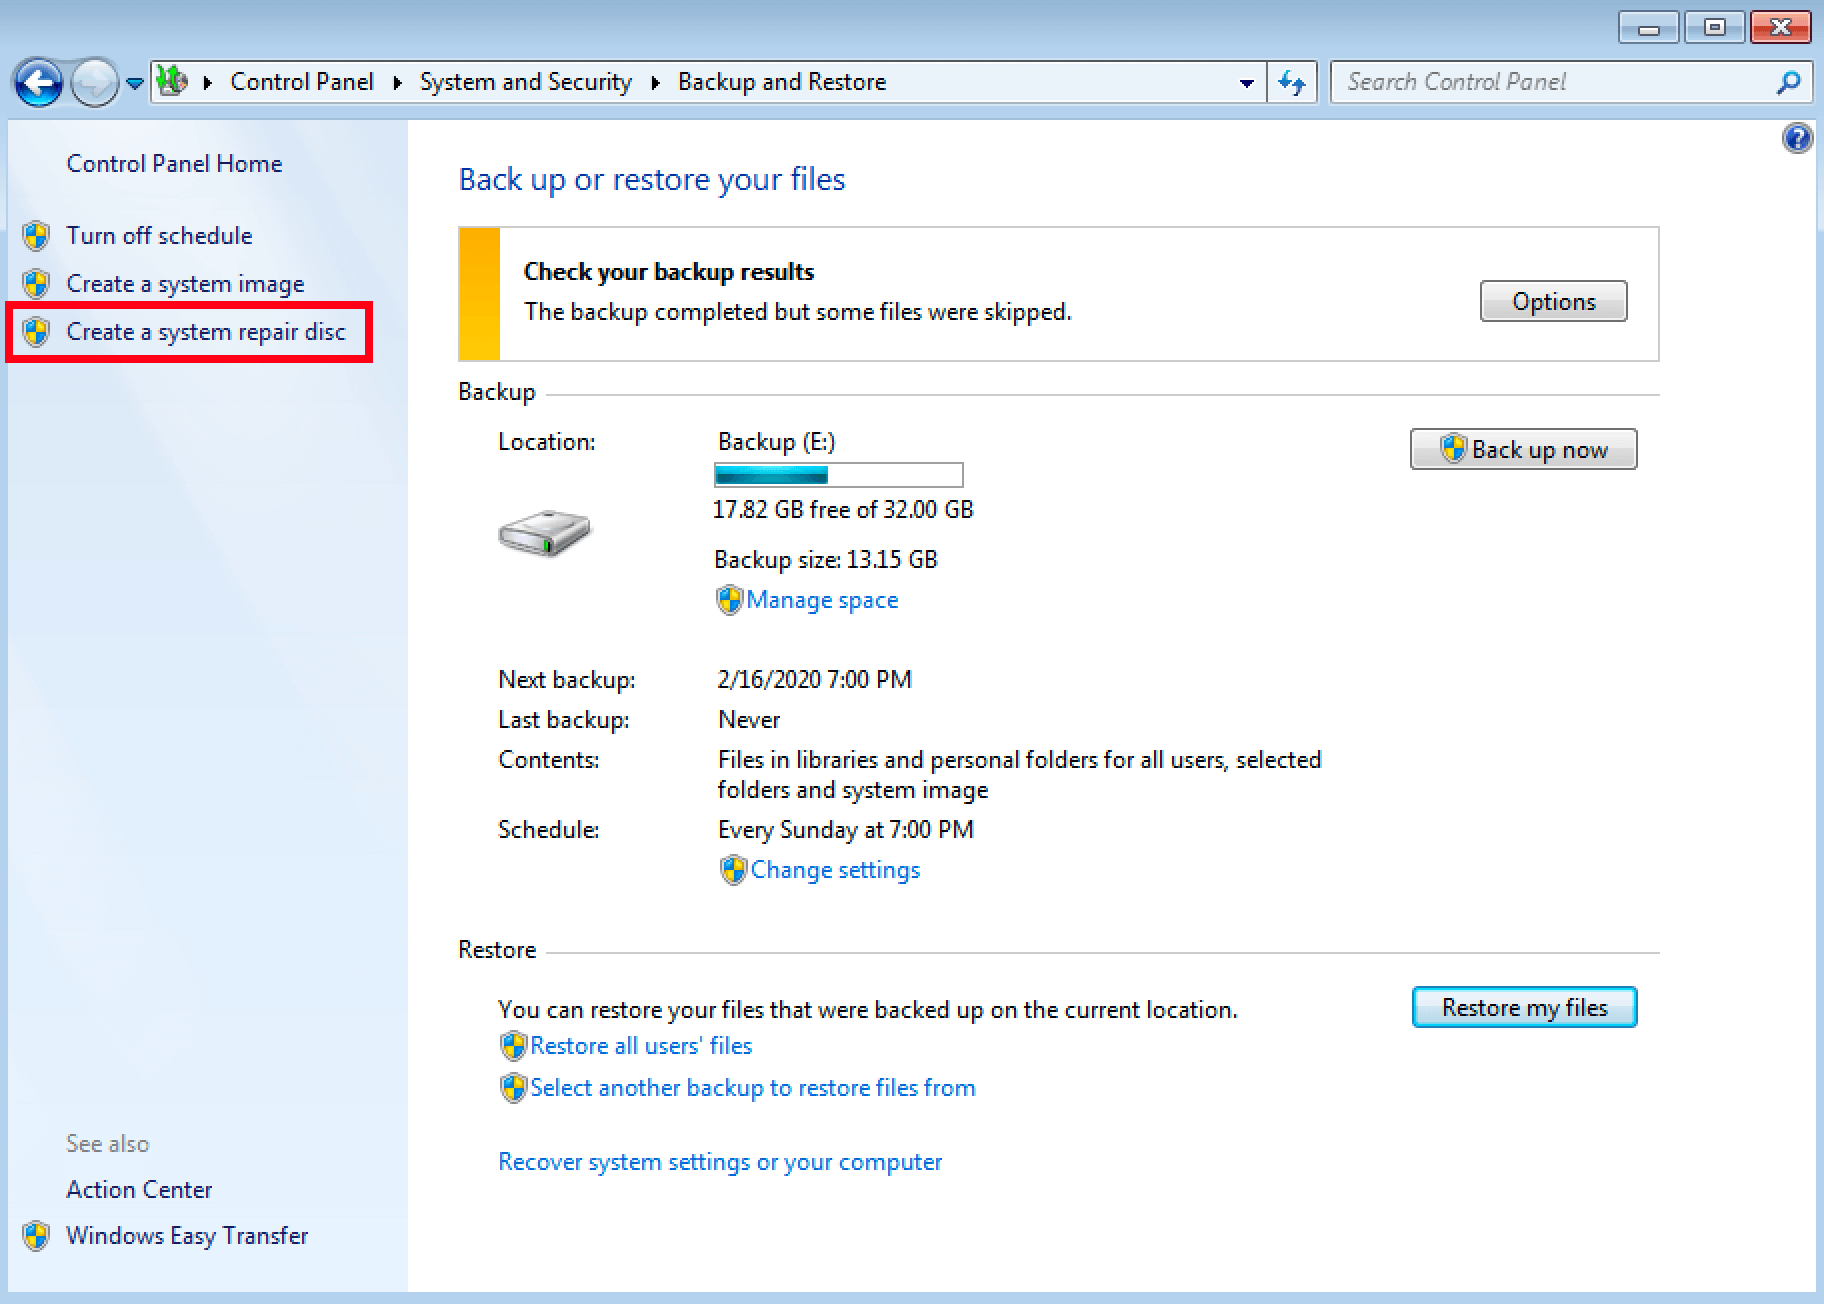 Option for creating a repair disc